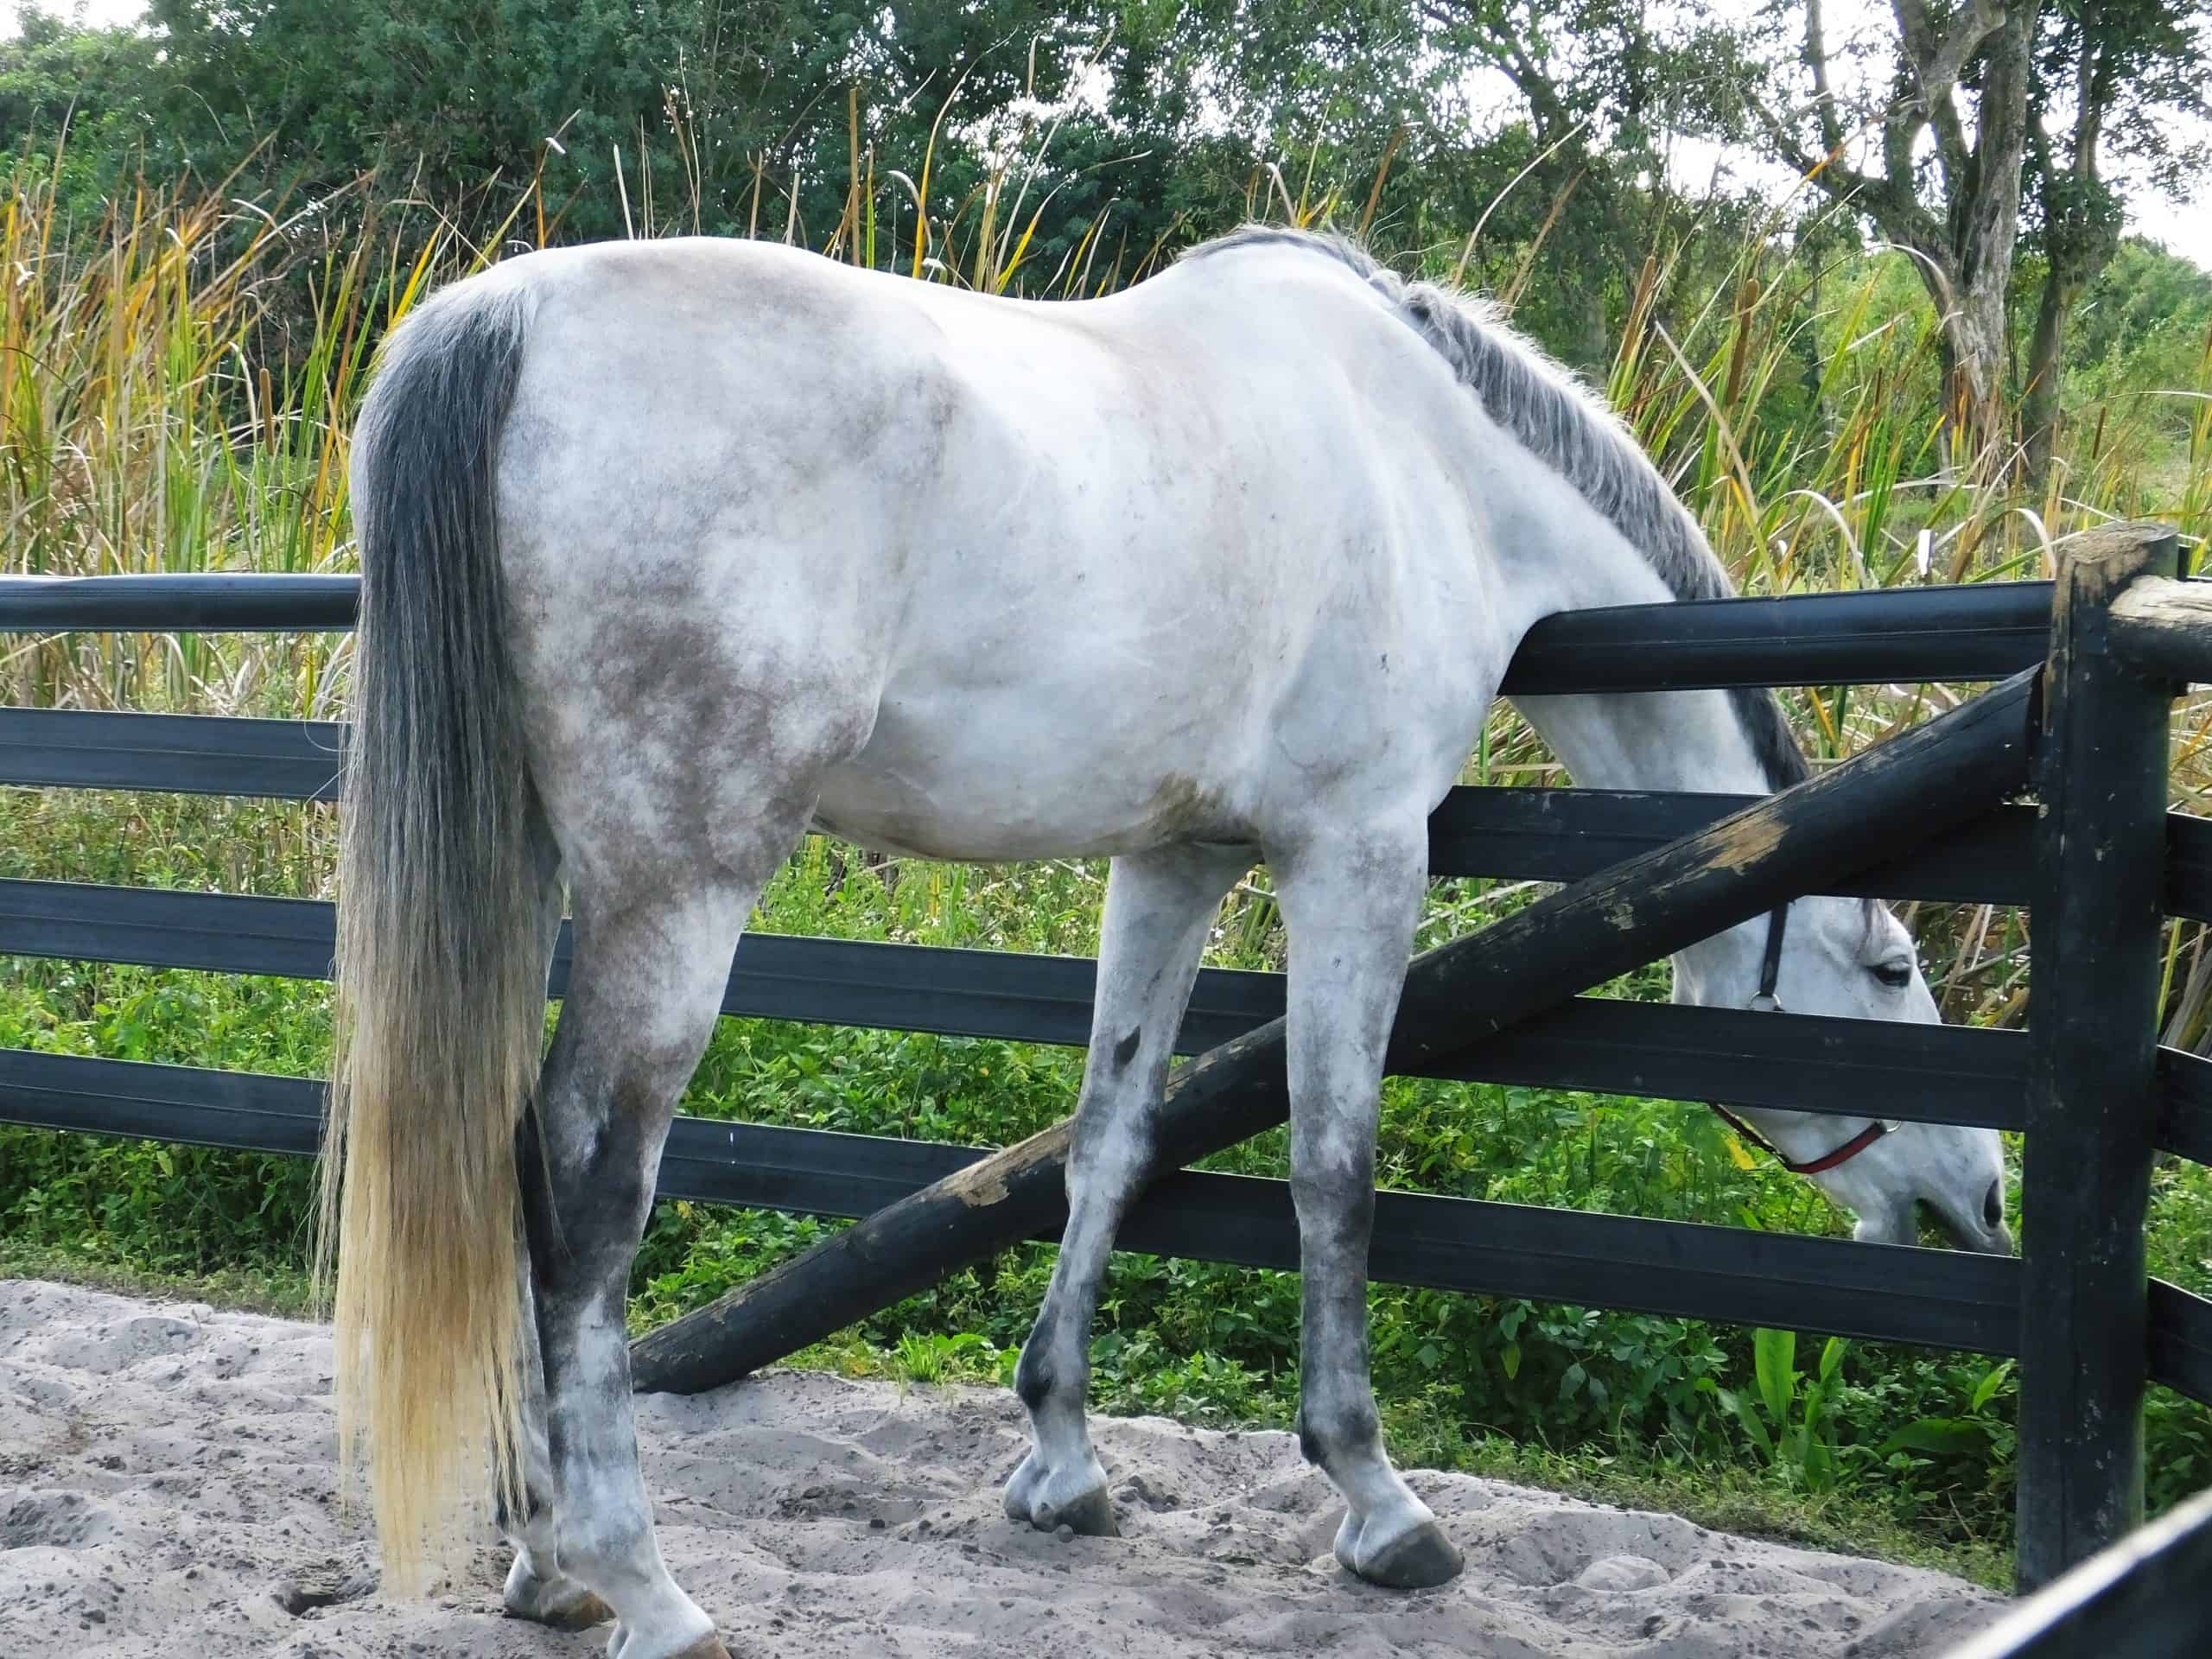 Grey colored horse in its turnout eating grass.